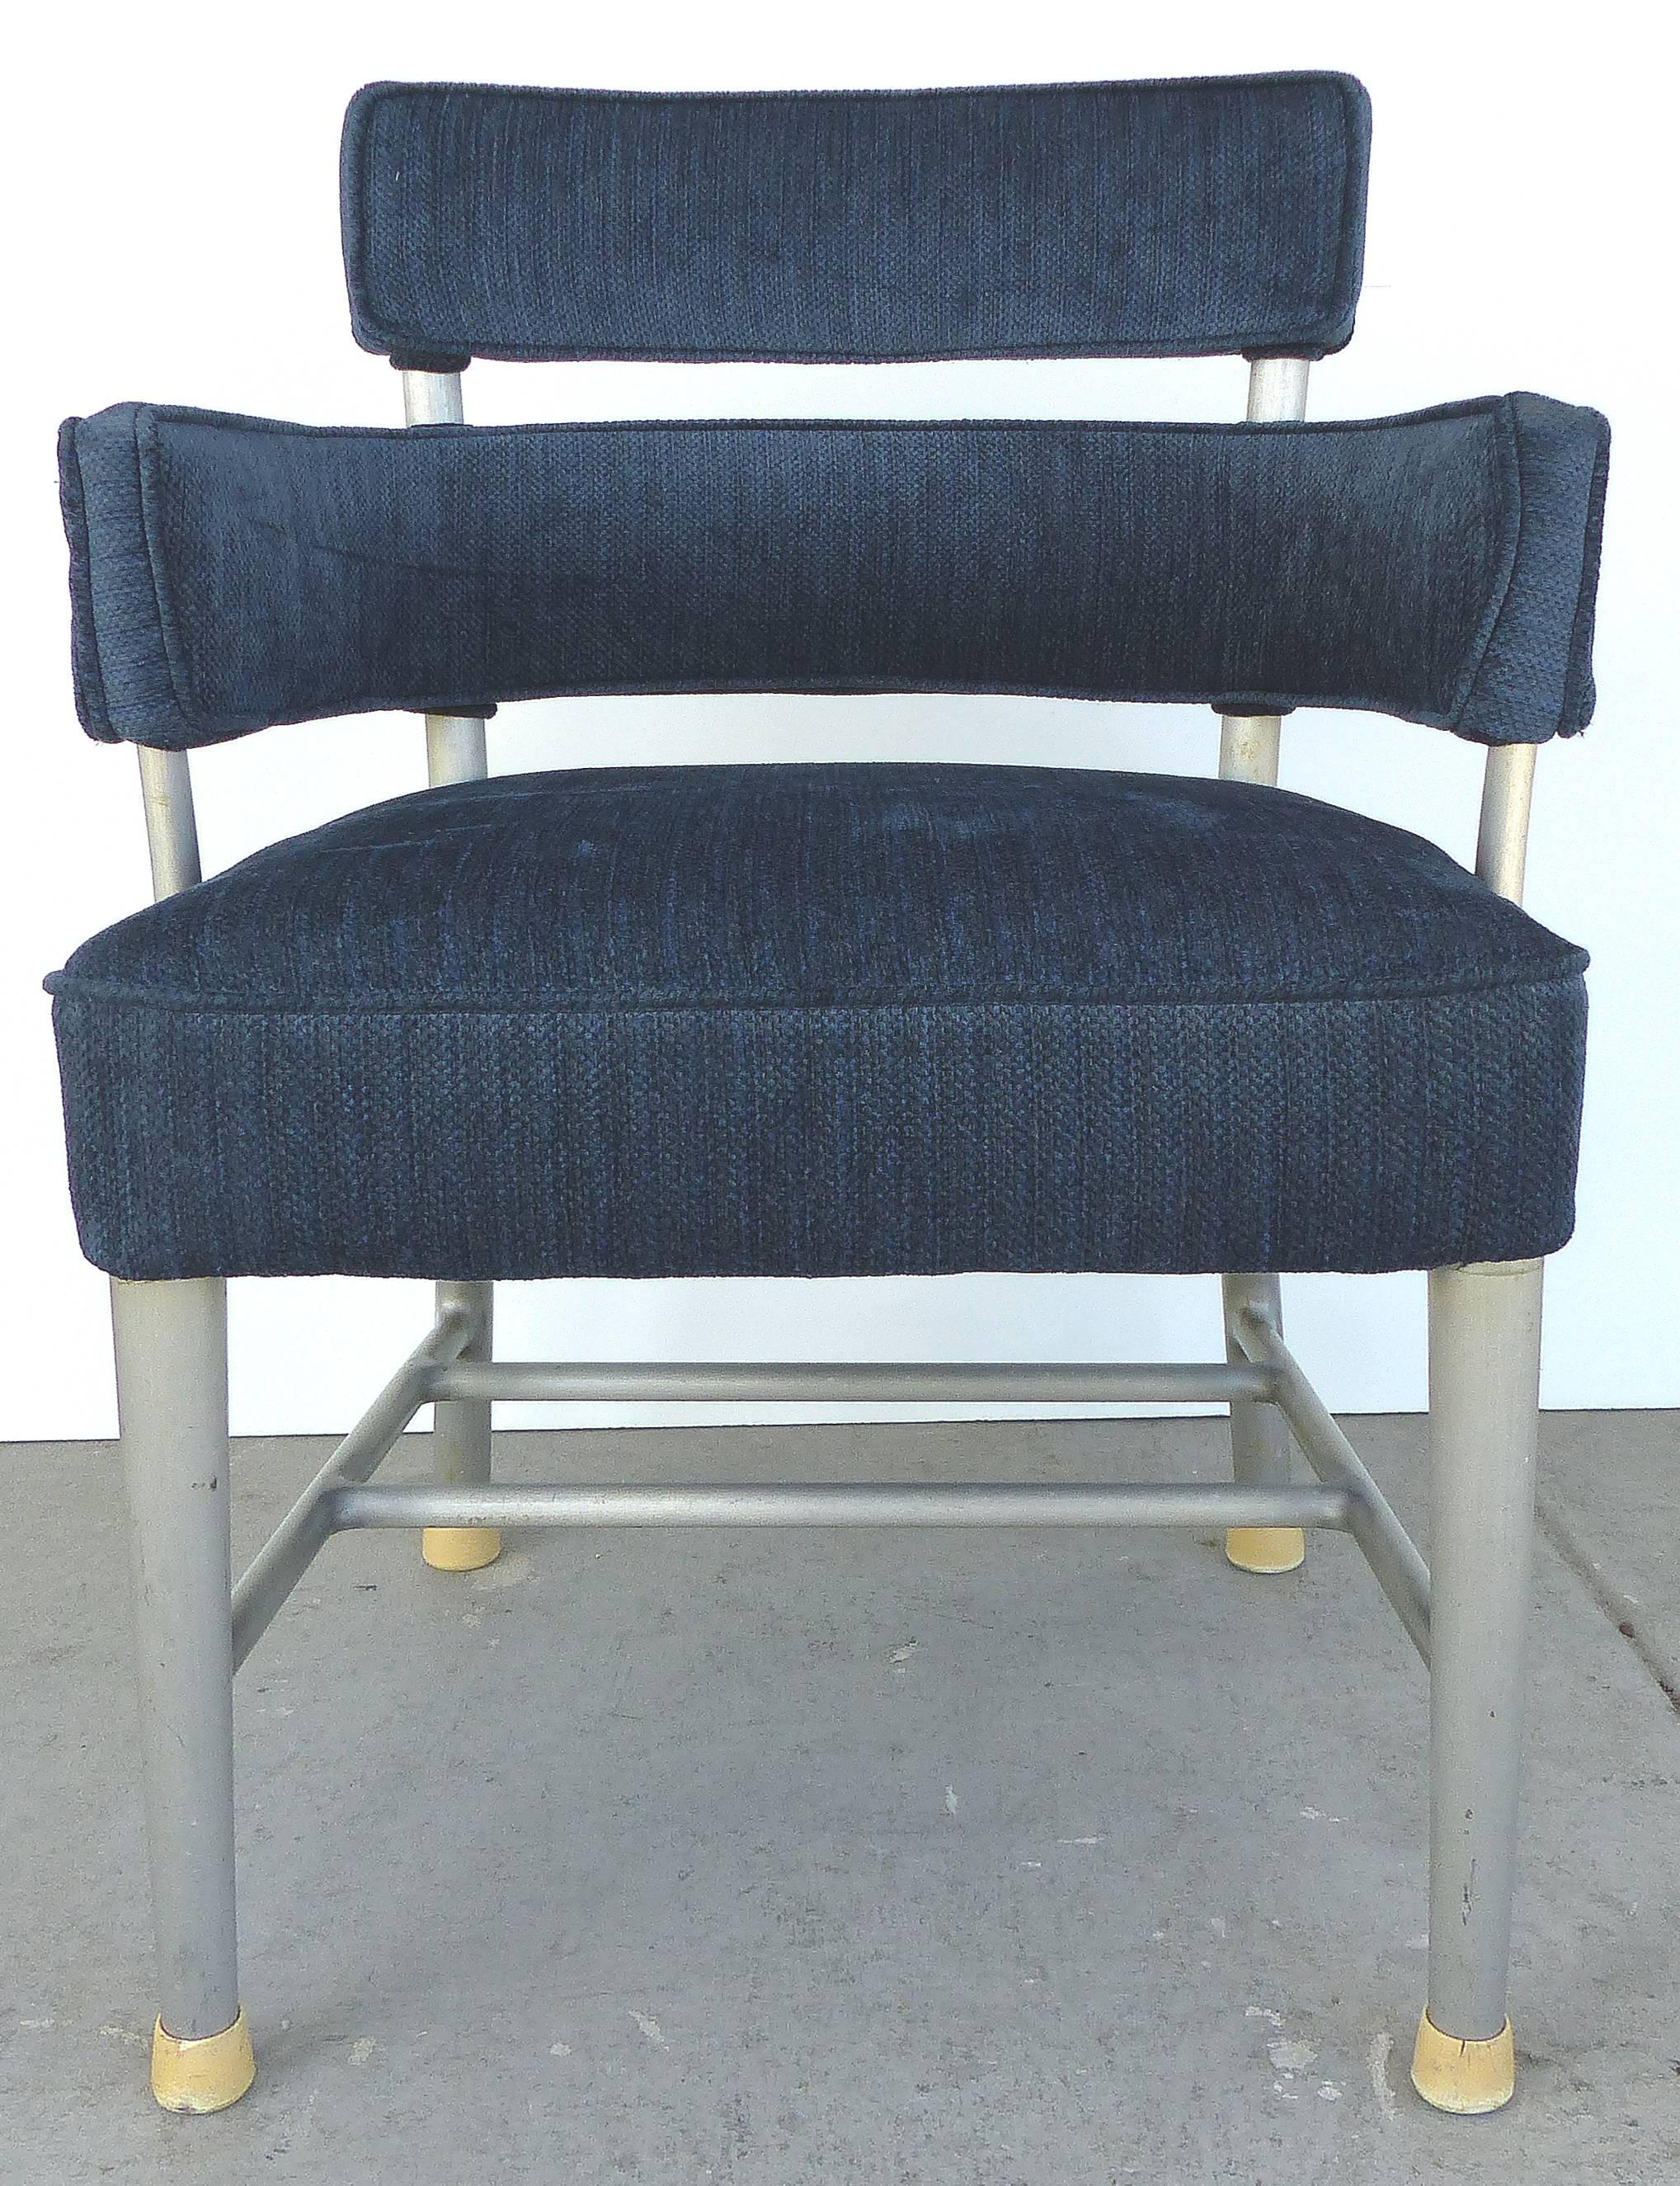 Mid-Century Modern S.S. United States Oceanliner Dining Room Chair, circa 1950